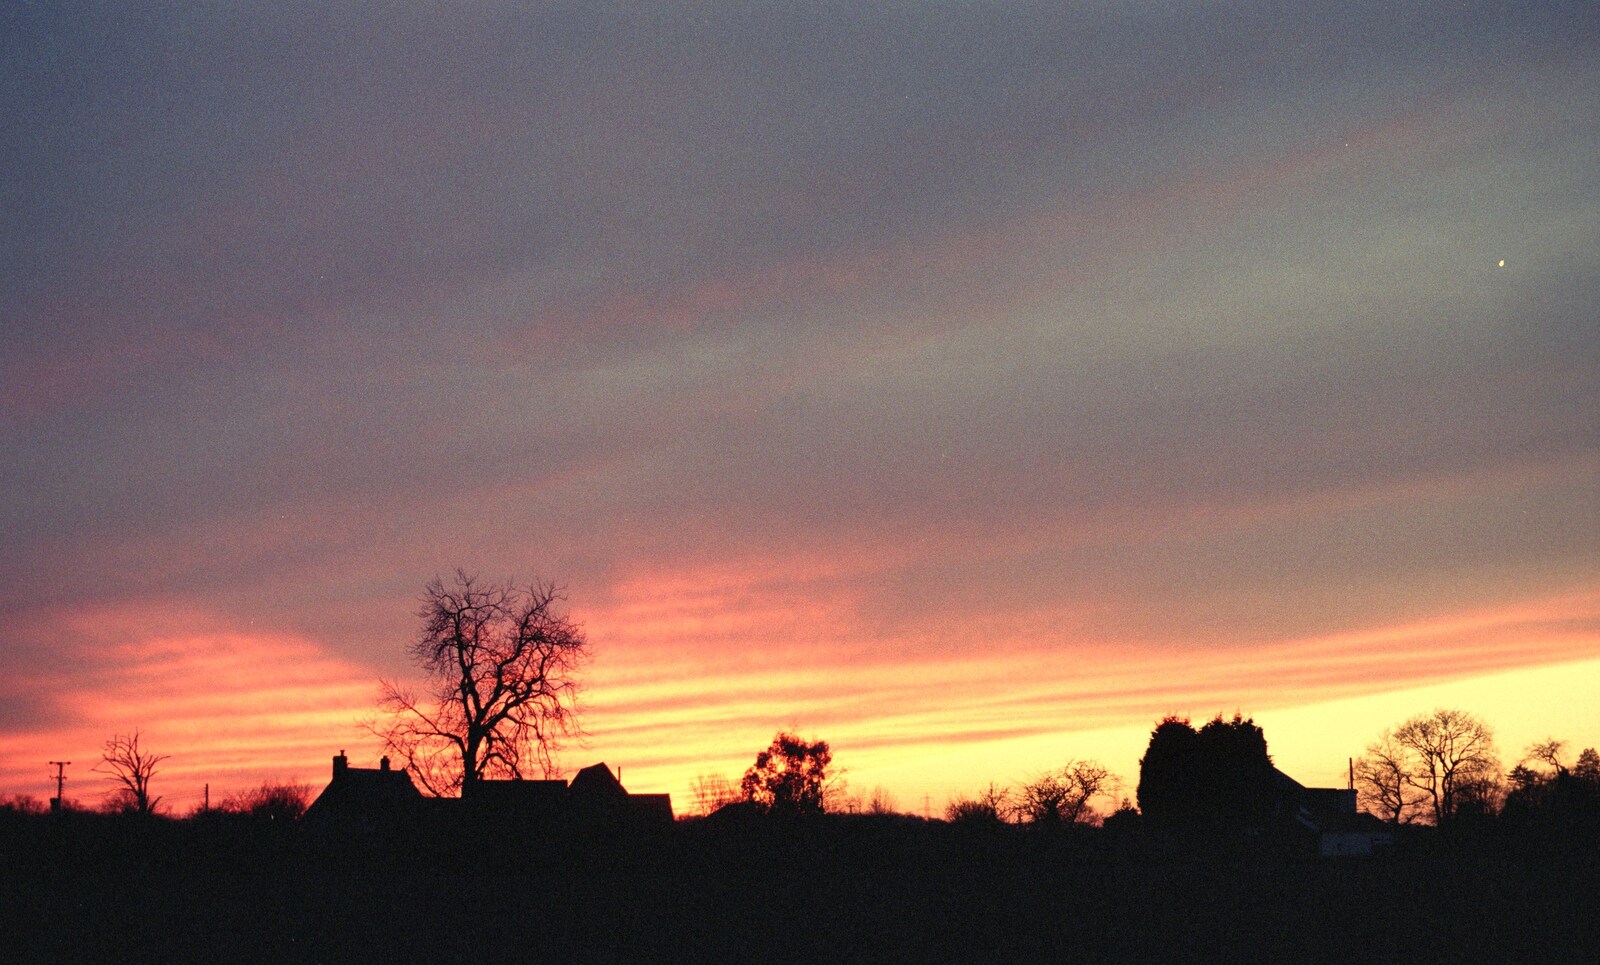 Riki's Wedding, Treboeth, Swansea - 7th May 1996: A sunset over the side field